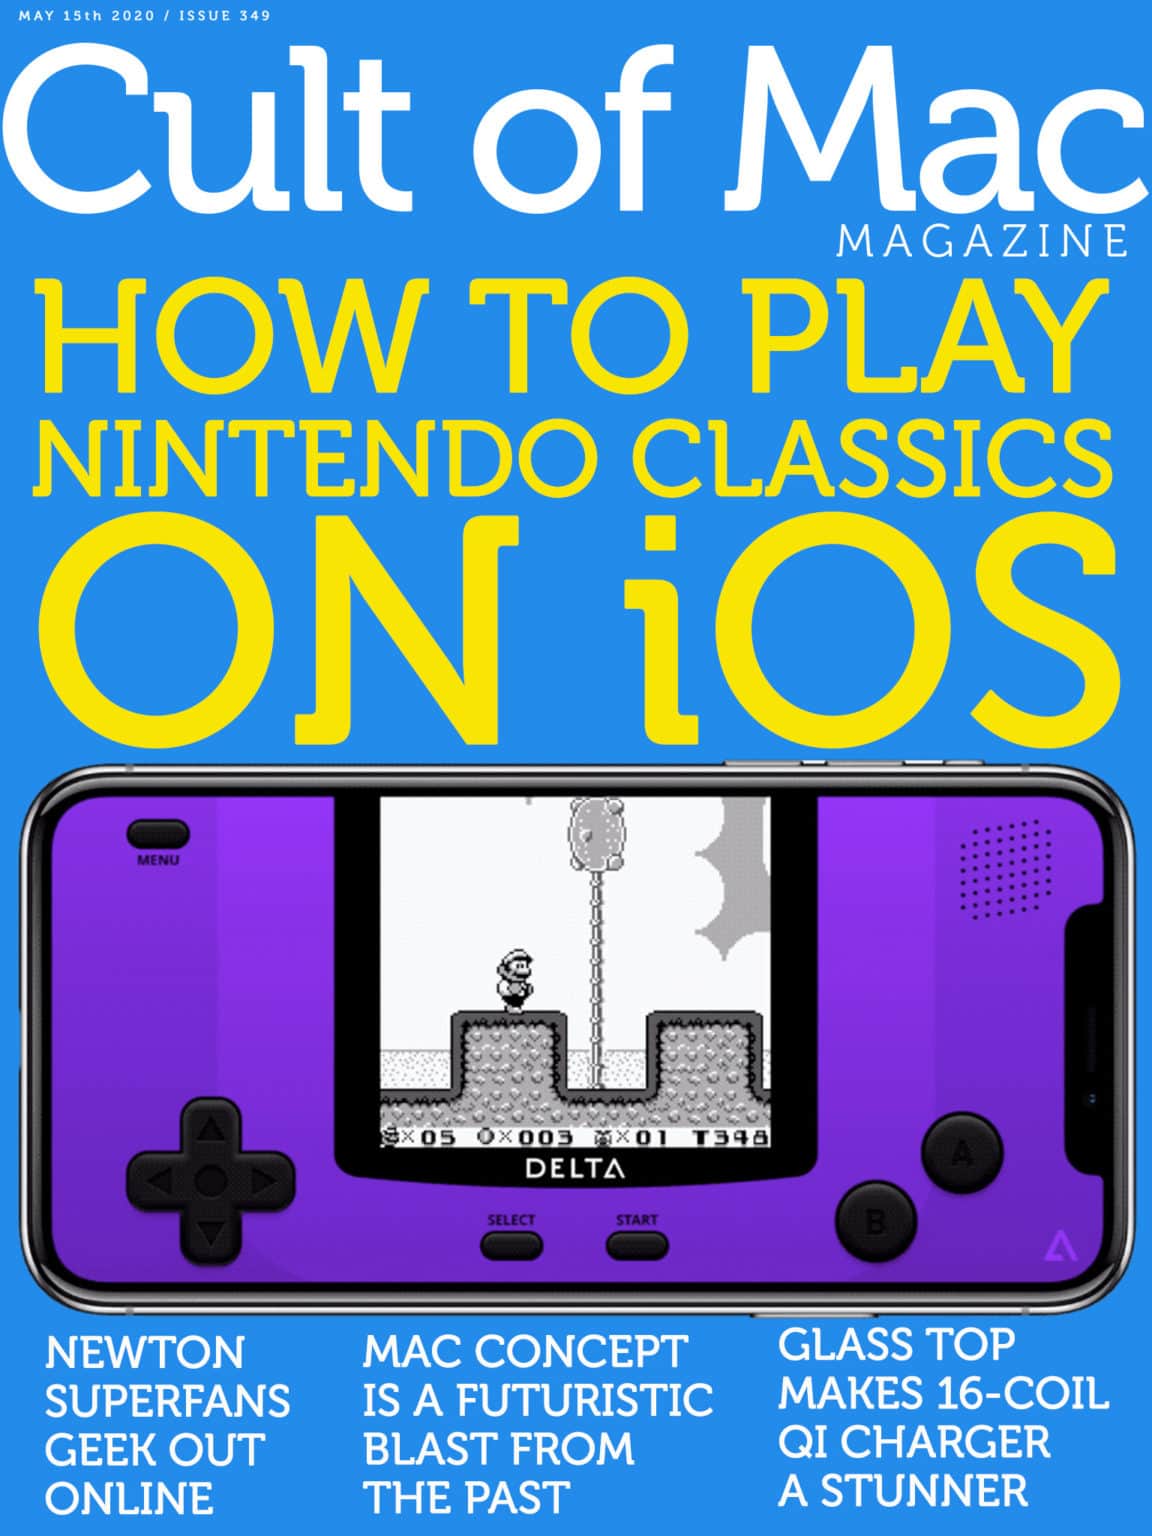 Get your game on! Find out how to play classic Nintendo games on iOS devices.